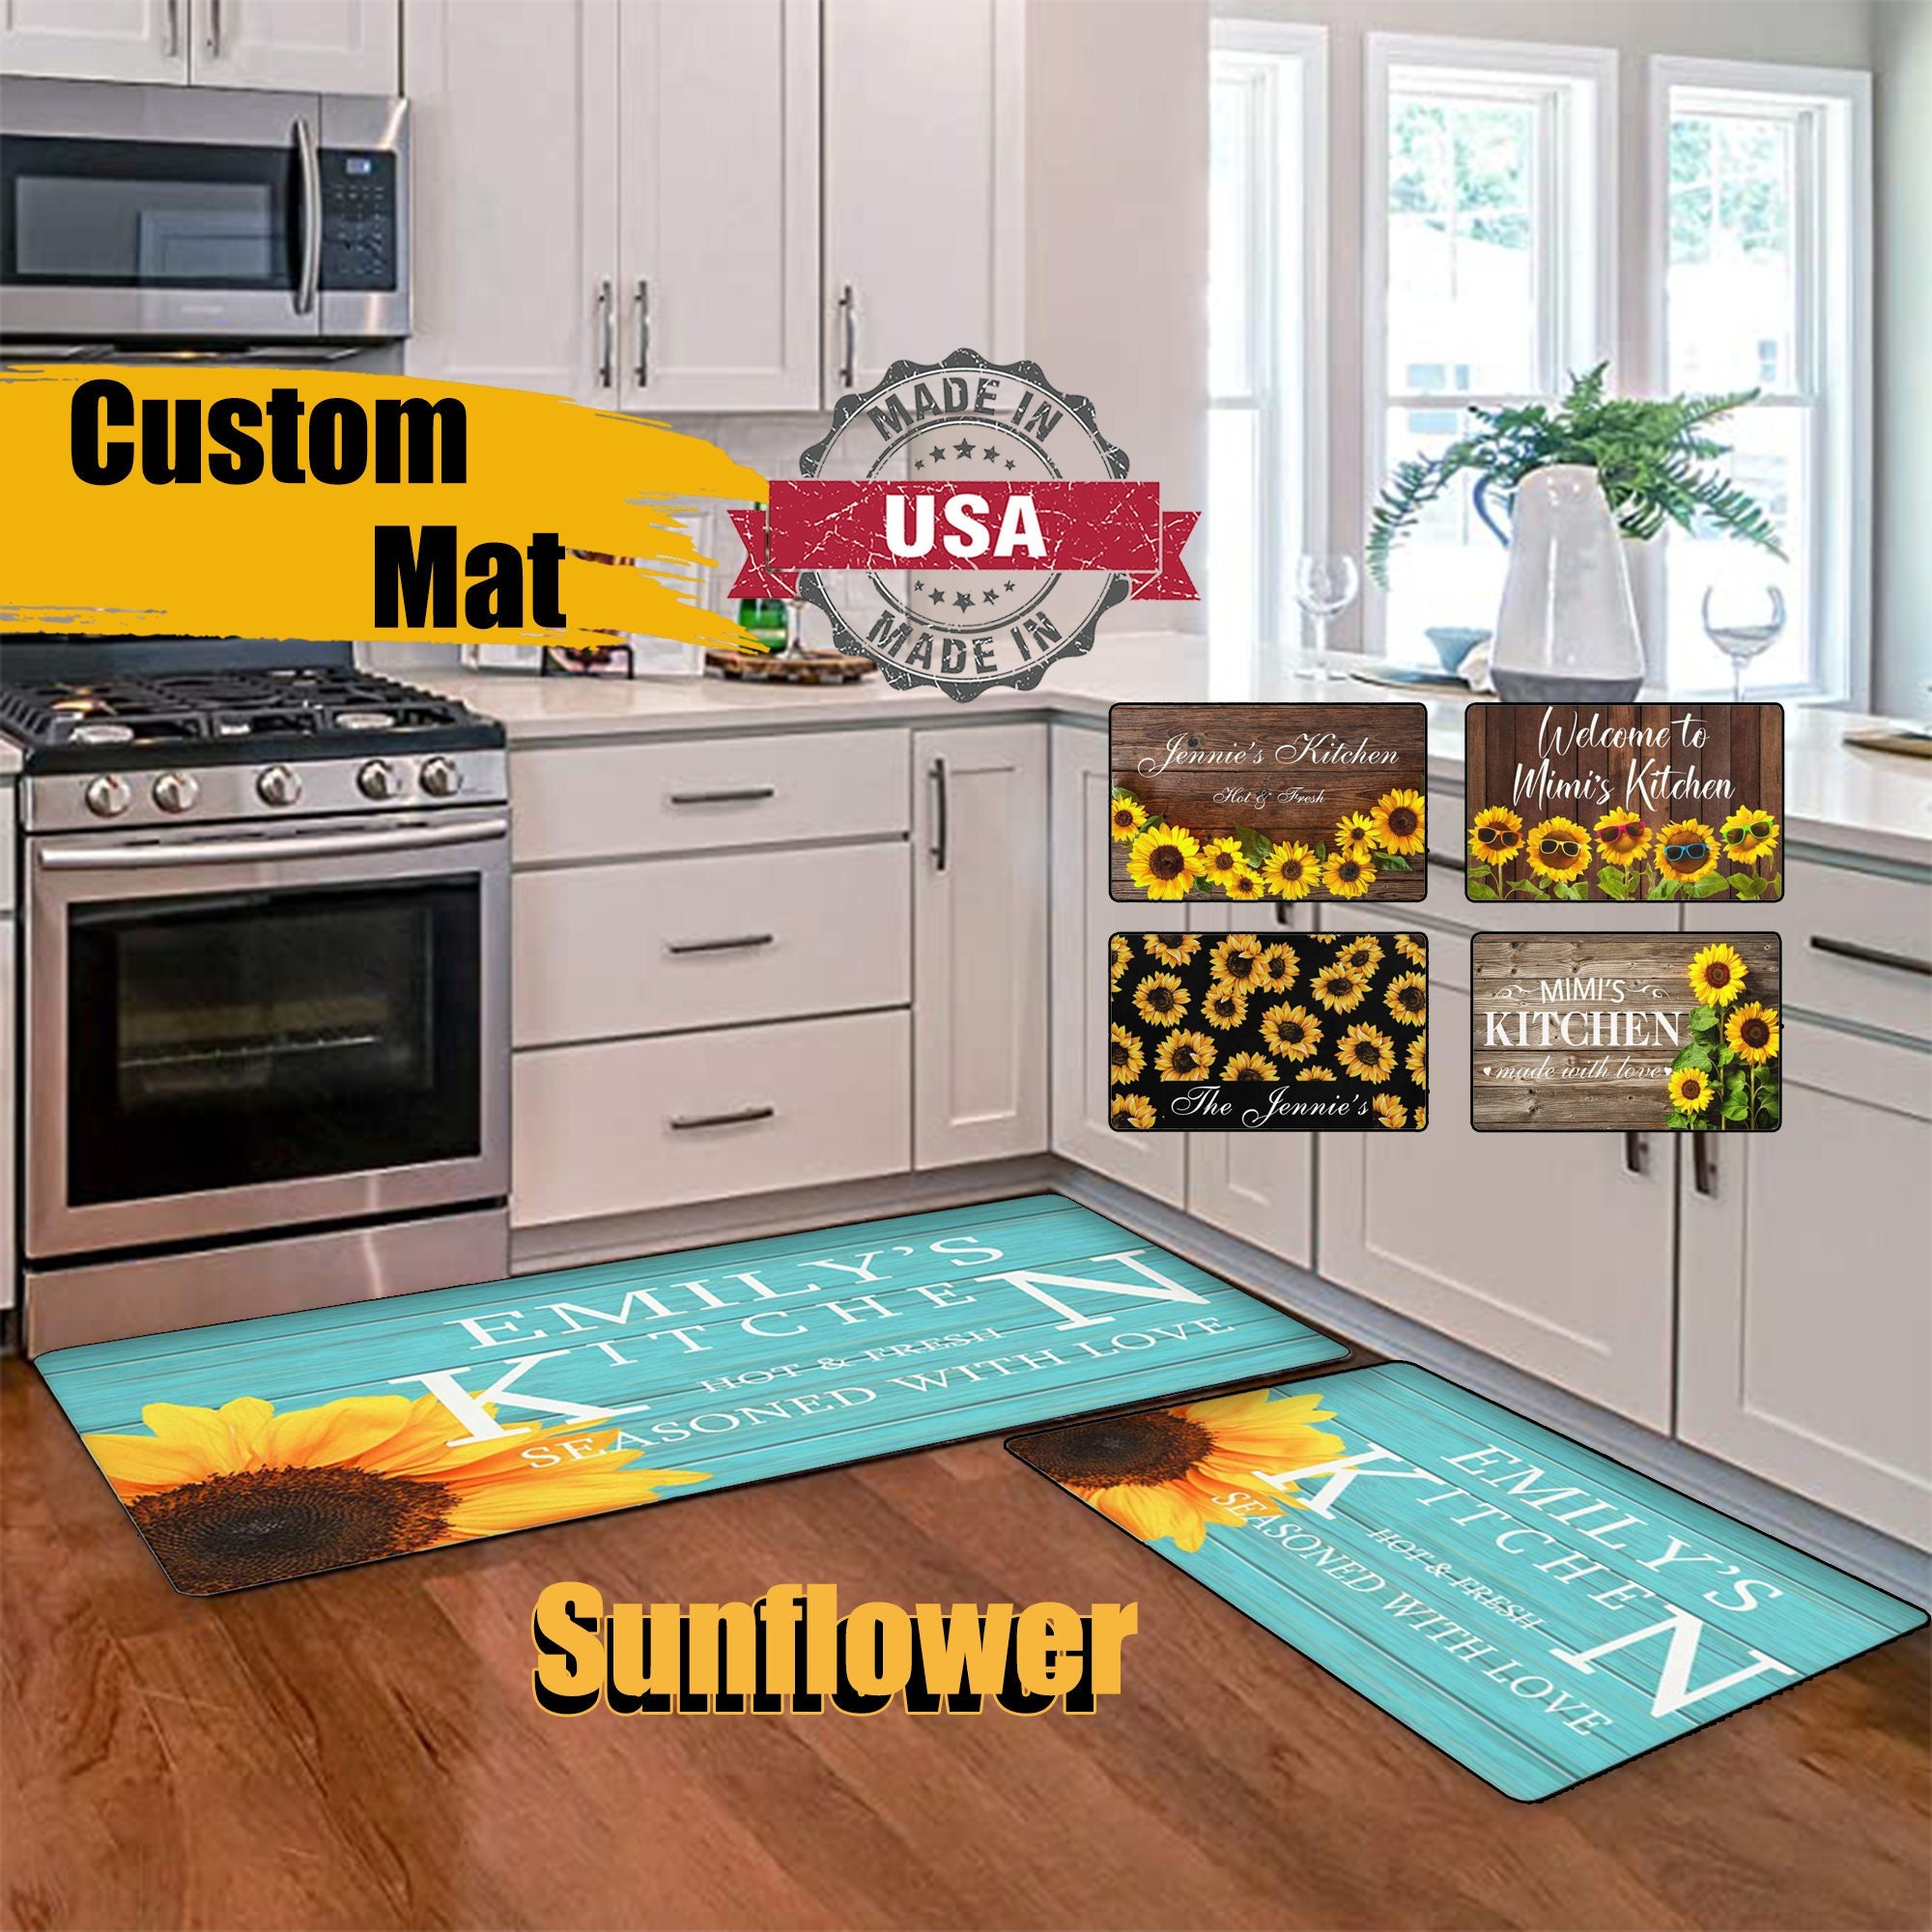  SIGOUYI Kitchen Mats for Floor, Farm Bee with Sunflowers Kitchen  Rugs, Kitchen Decor Runner Rug for Kitchen Organization, Anti-Fatigue Mats  Non-Slip Kitchen Mat for Laundry Room Office : Home & Kitchen